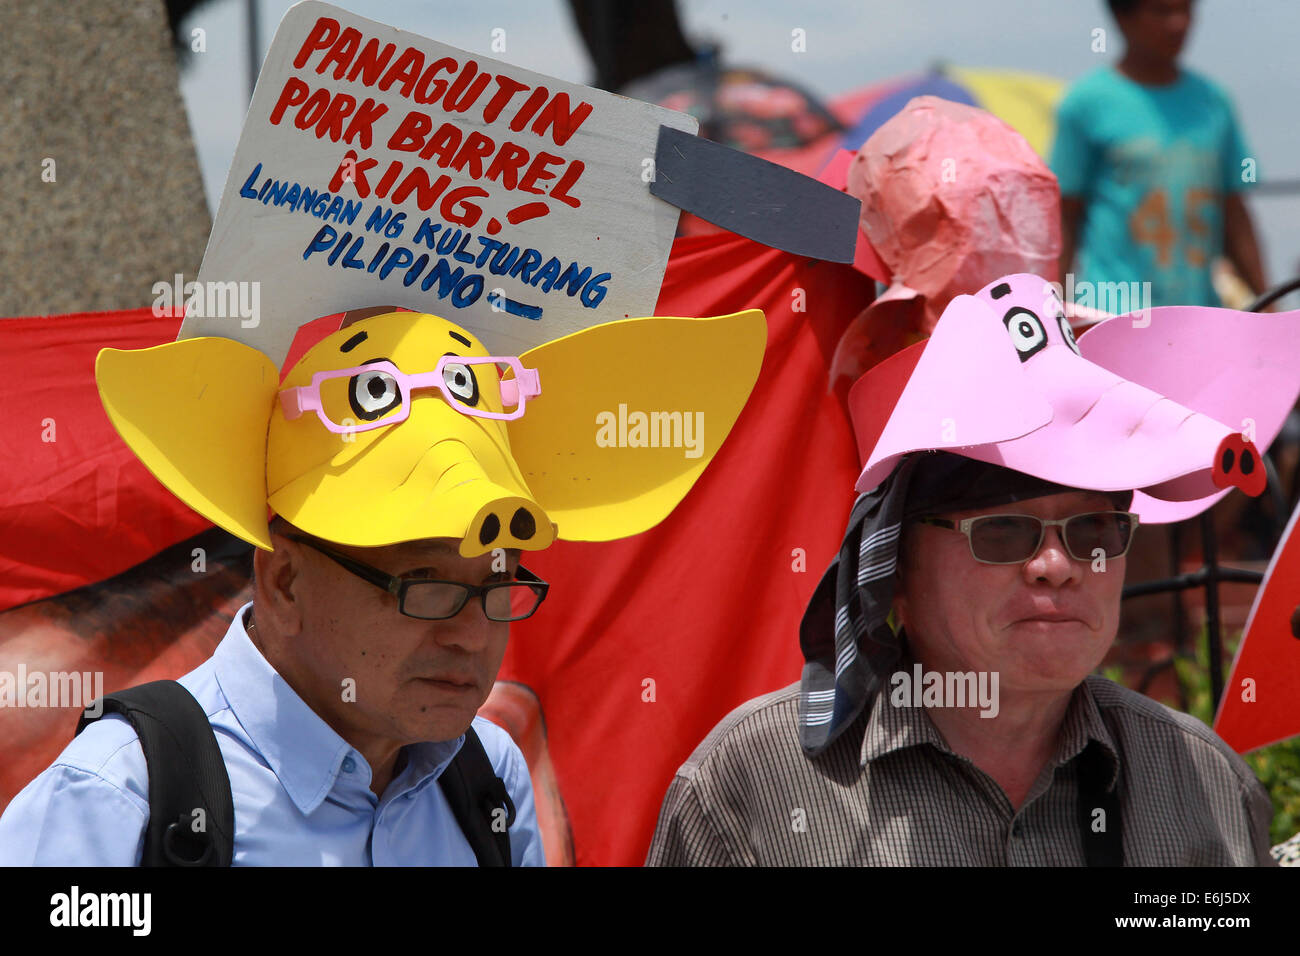 Manila, Philippines. 25th Aug, 2014. People wear pig hats during a protest rally in Manila, the Philippines on Aug. 25, 2014. Tens of thousands of Philippine people marched to the Quirino Grandstand in Philippine capital city of Manila on Monday to sign the petition against the priority development assistance fund, popularly known as 'pork barrel'. Credit:  Rouelle Umali/Xinhua/Alamy Live News Stock Photo